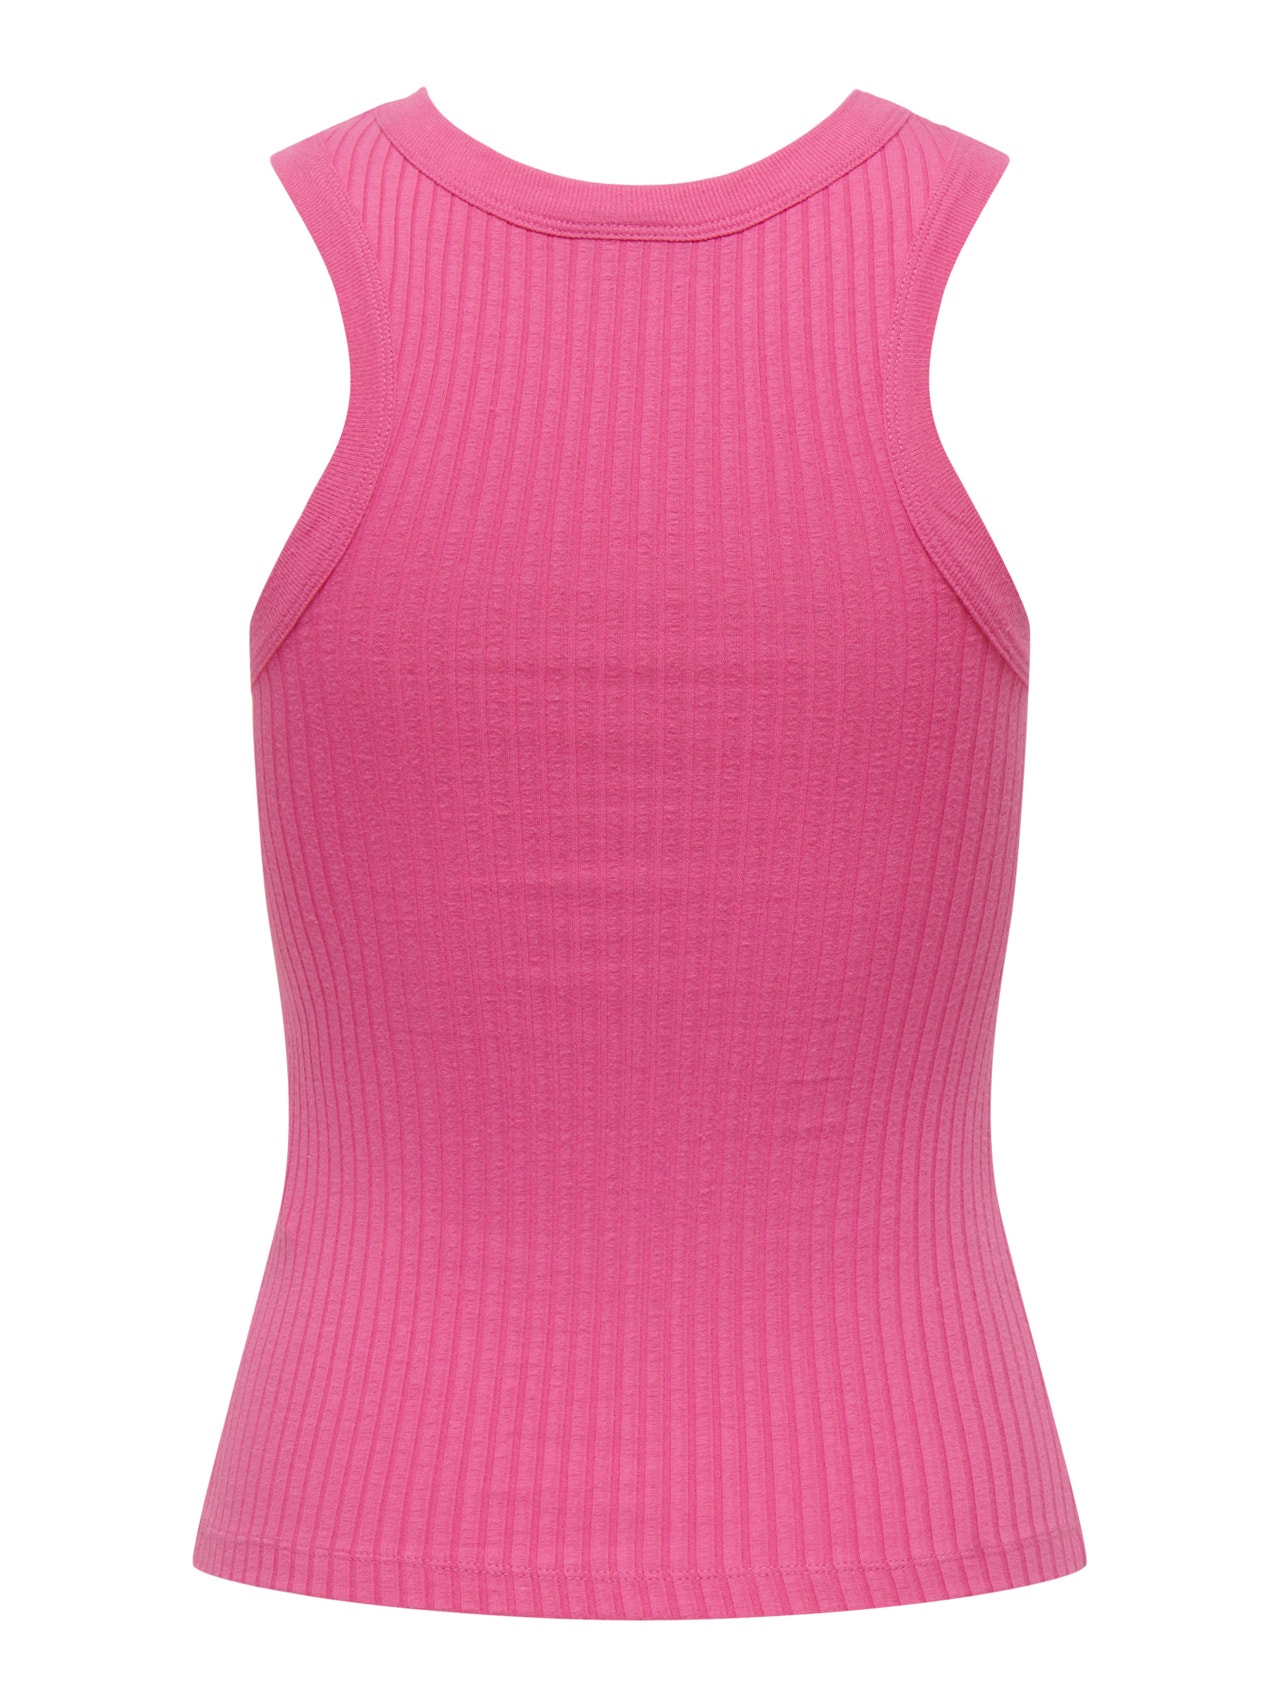 ONLY Slim Fit O-Neck Tank-Top -Pink Power - 15291932